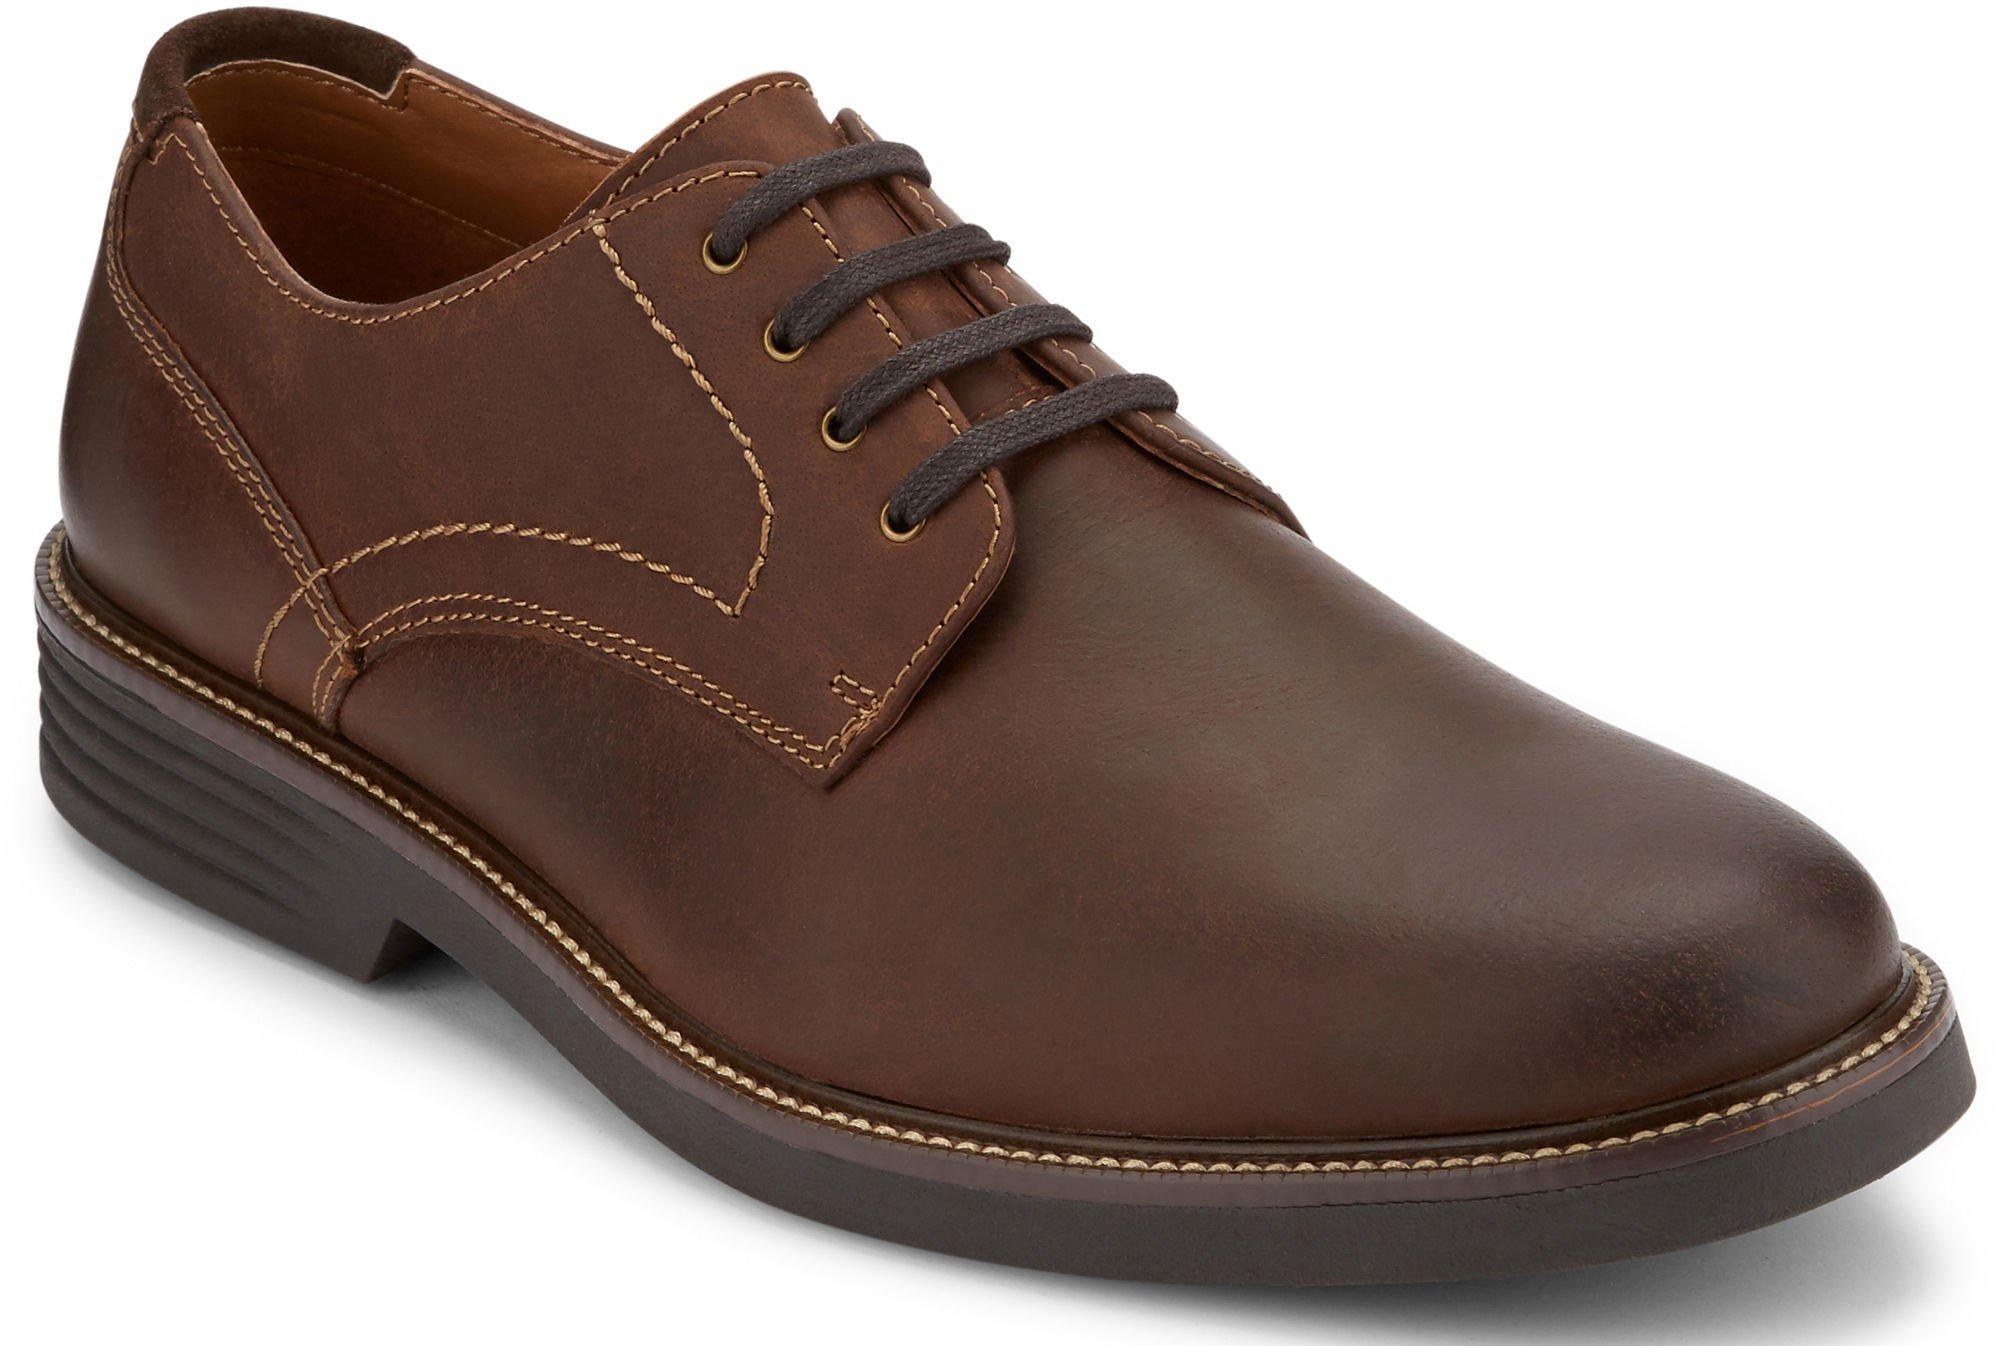 Dockers Mens Parkway Oxfords Shoes